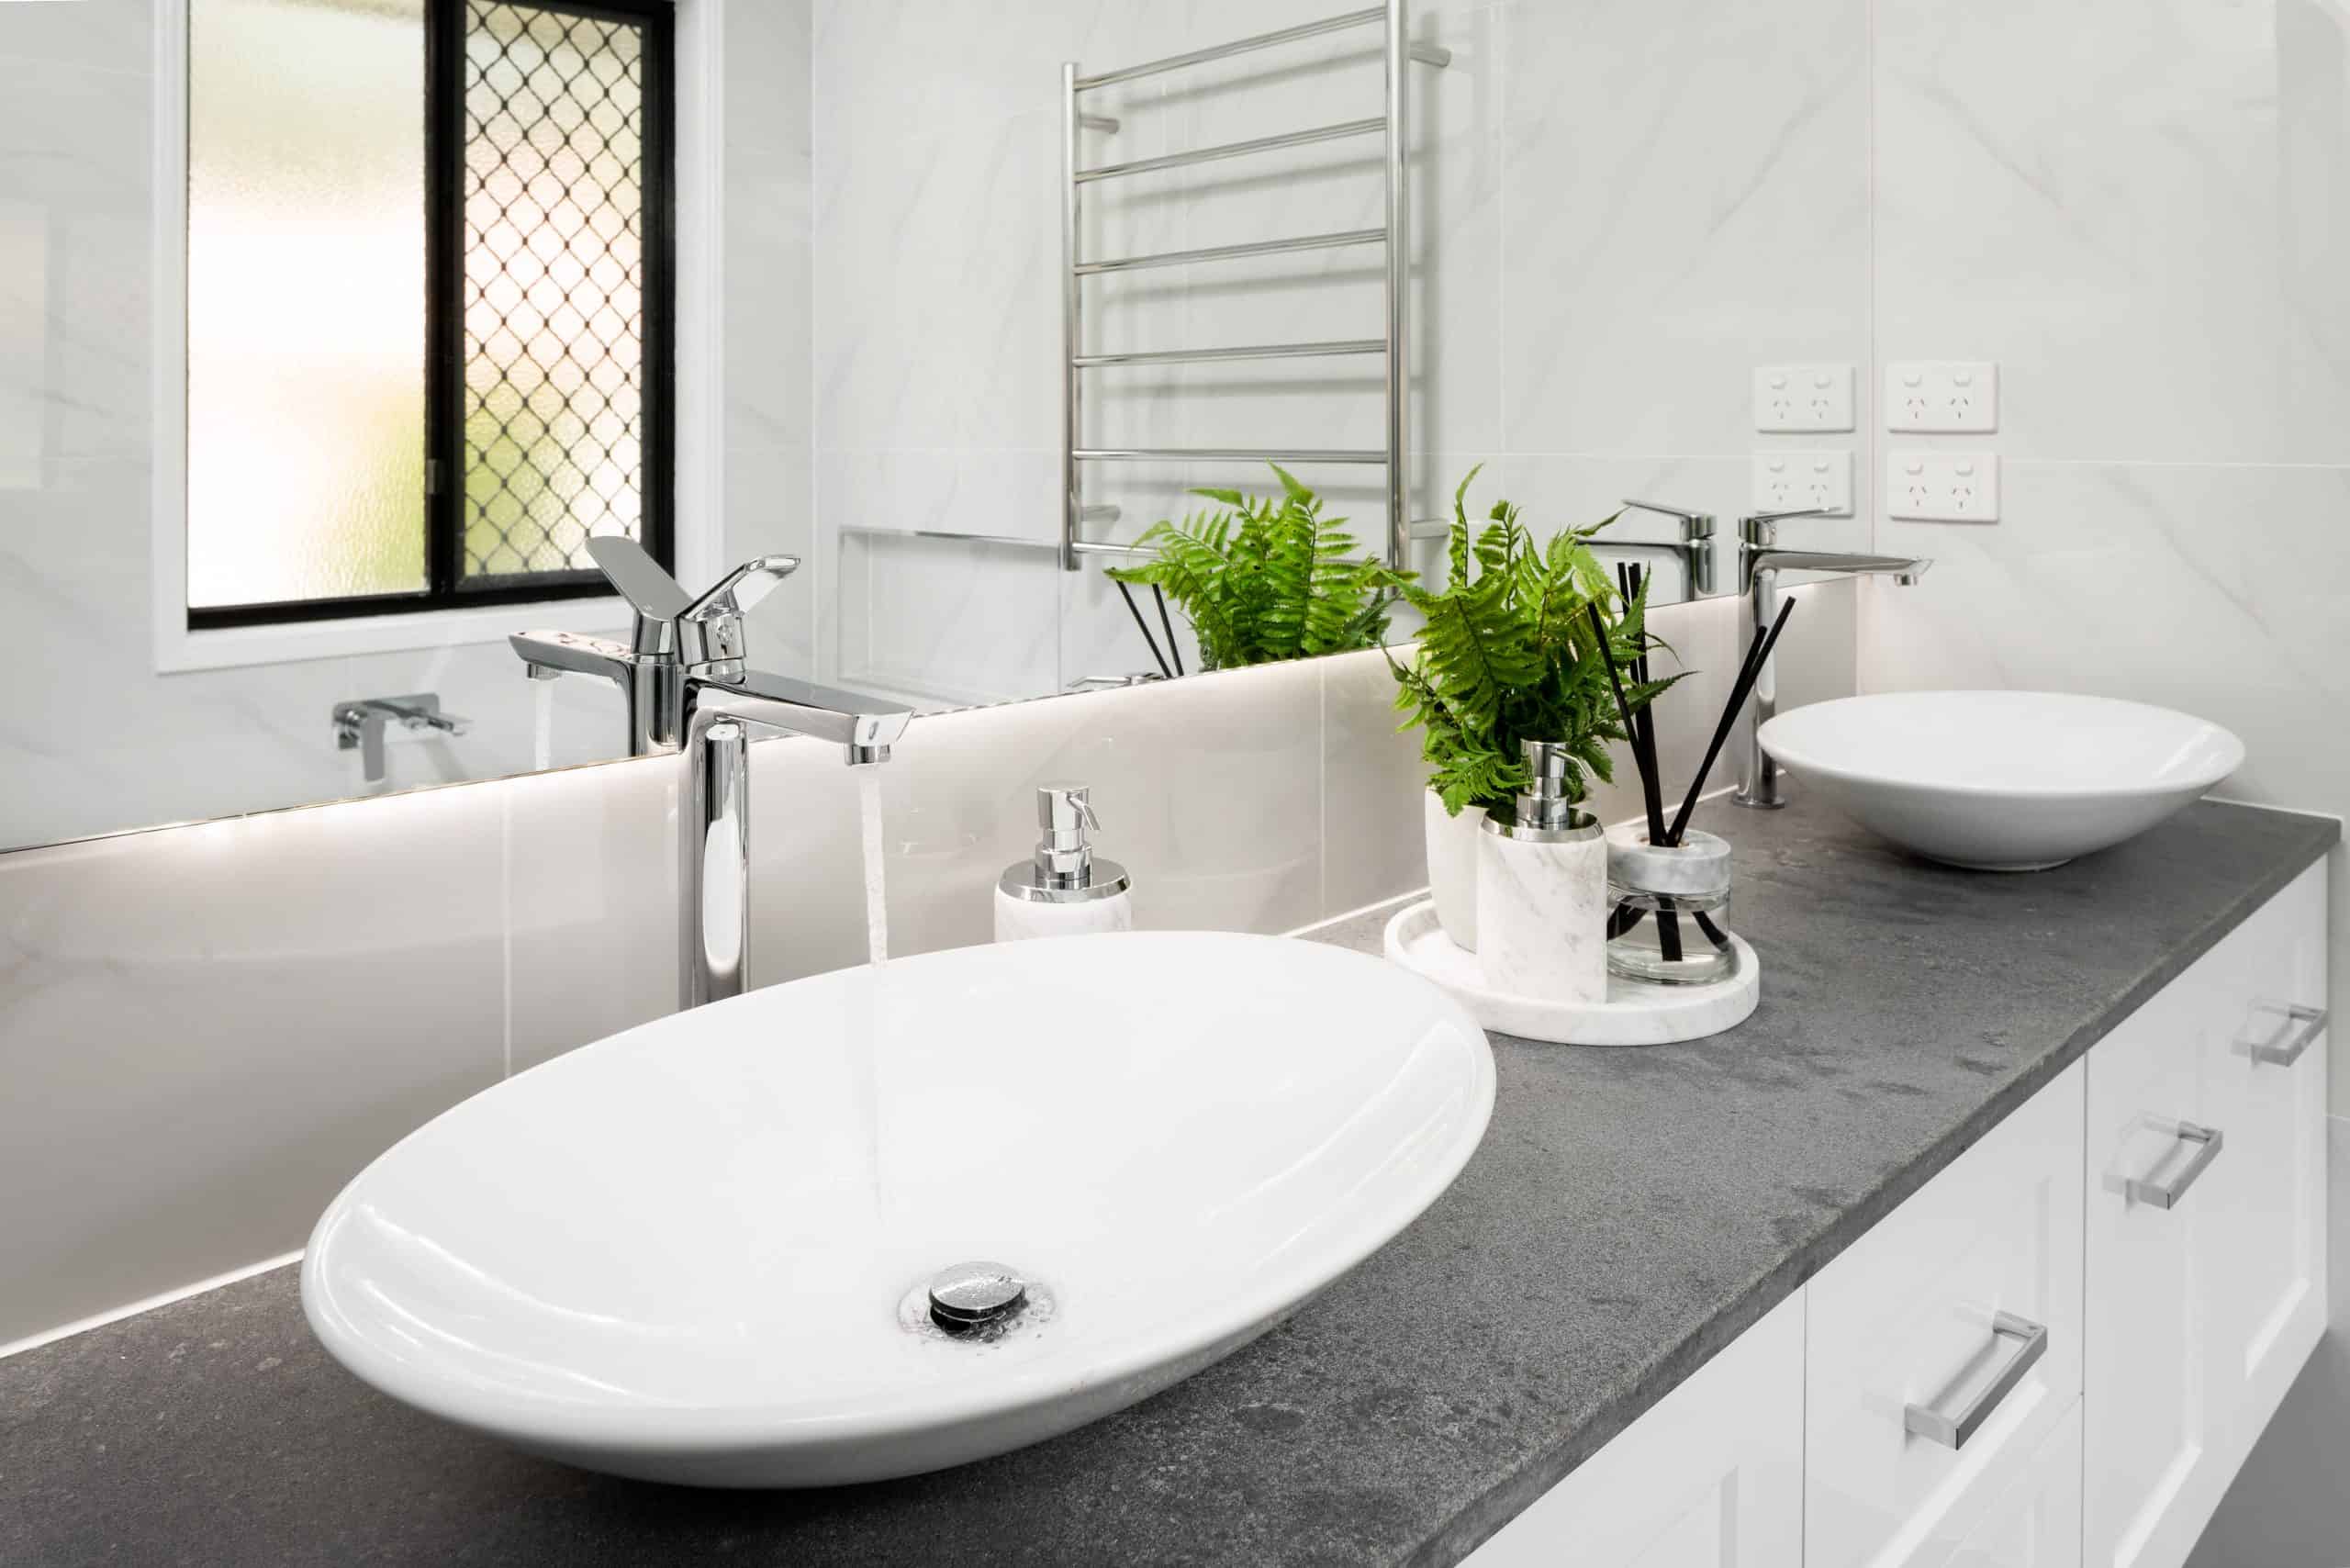 White and grey aesthetic in a modern bathroom